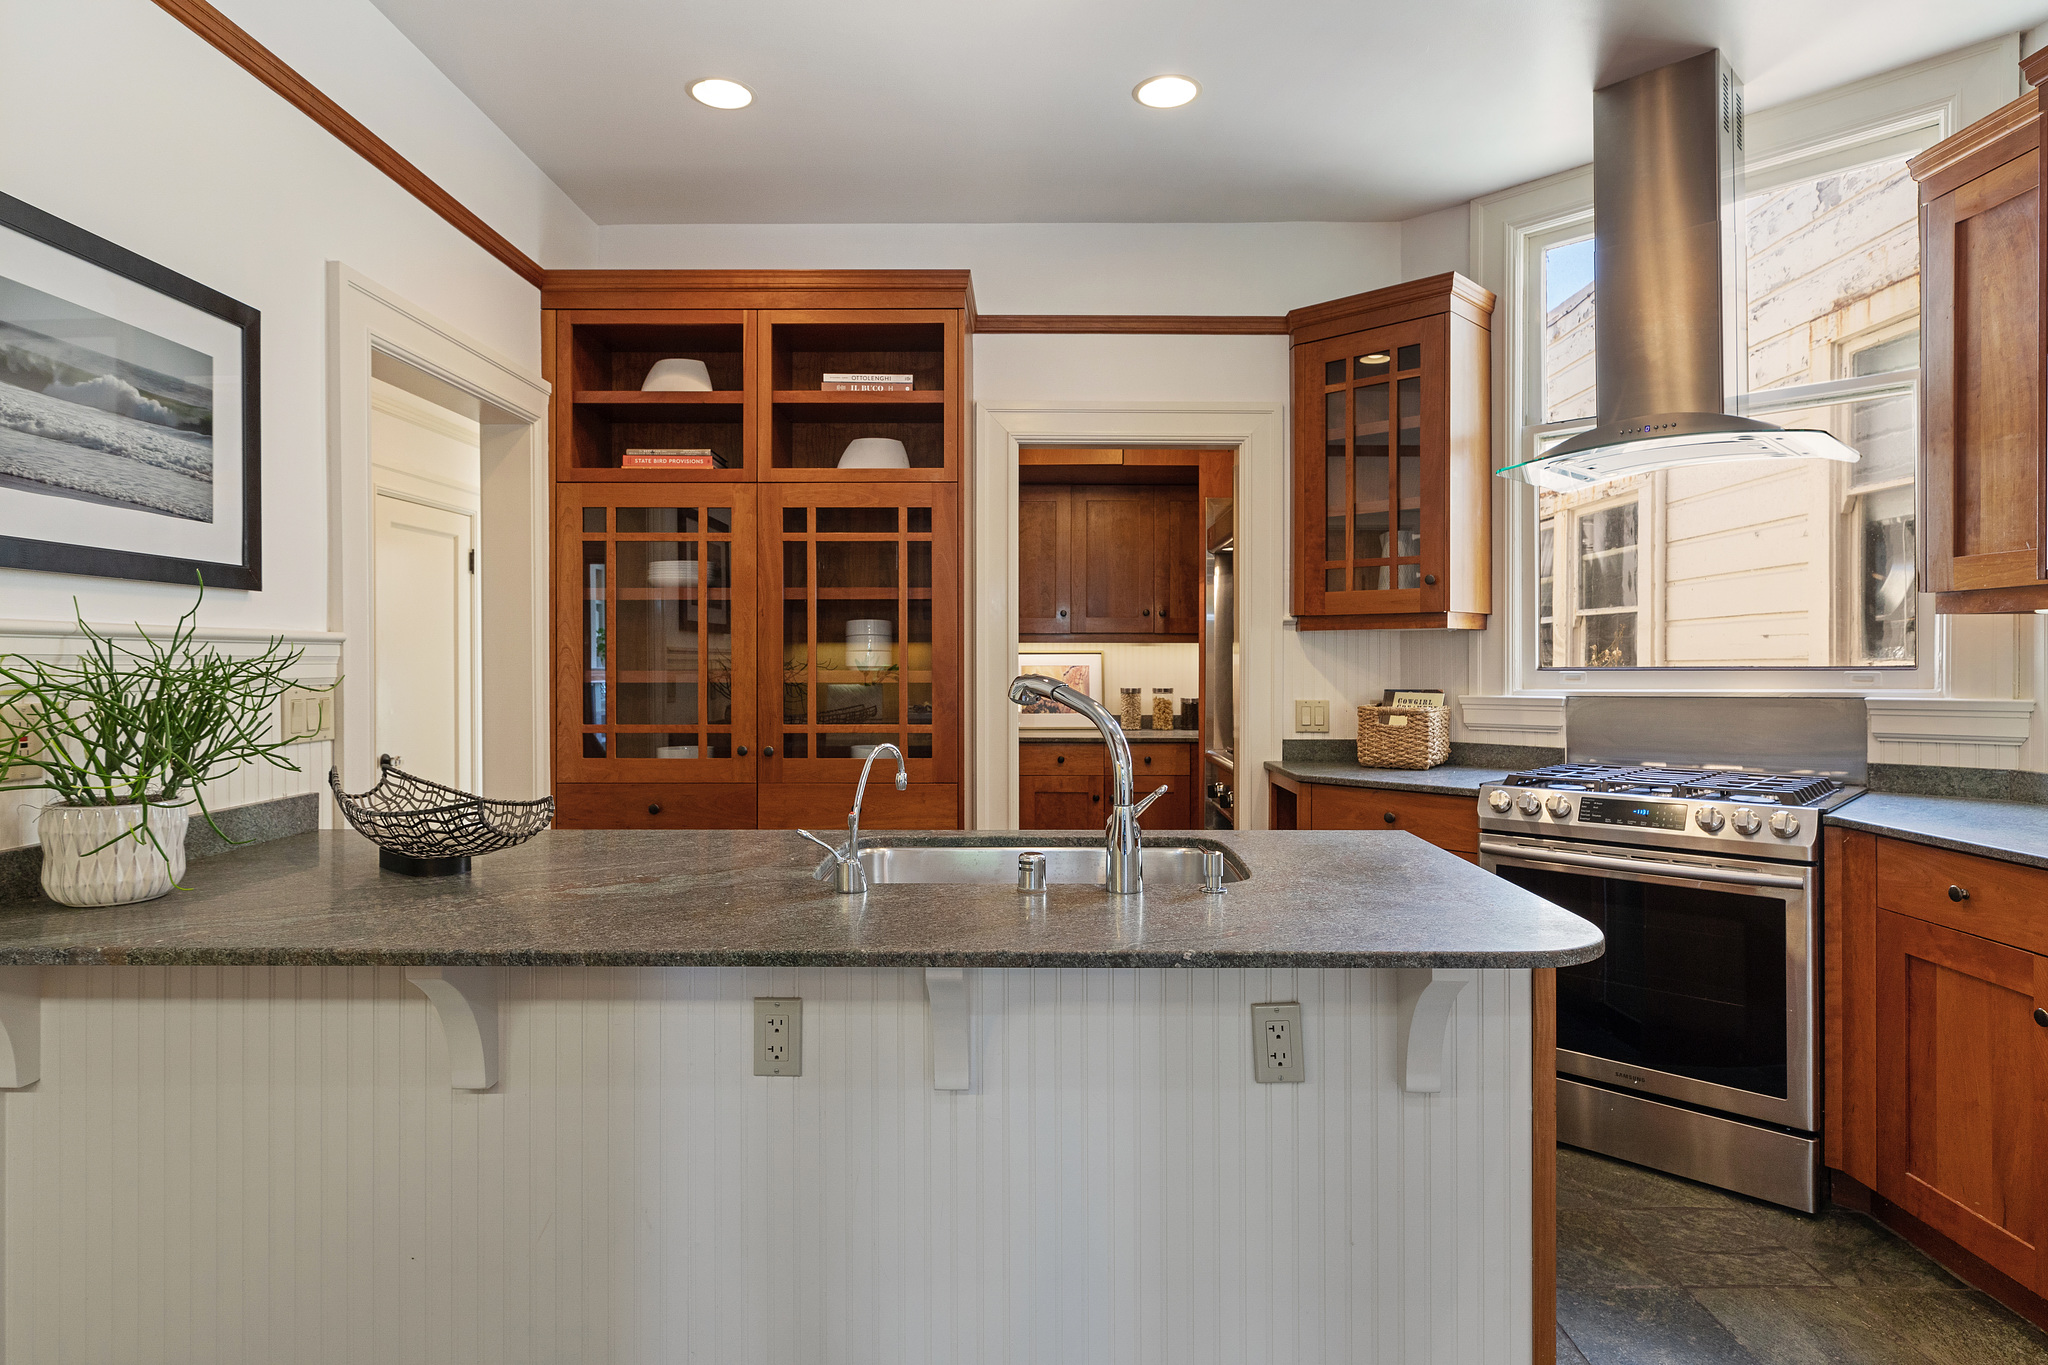 Property Photo: View of the kitchen, showing an island cabinet with sink